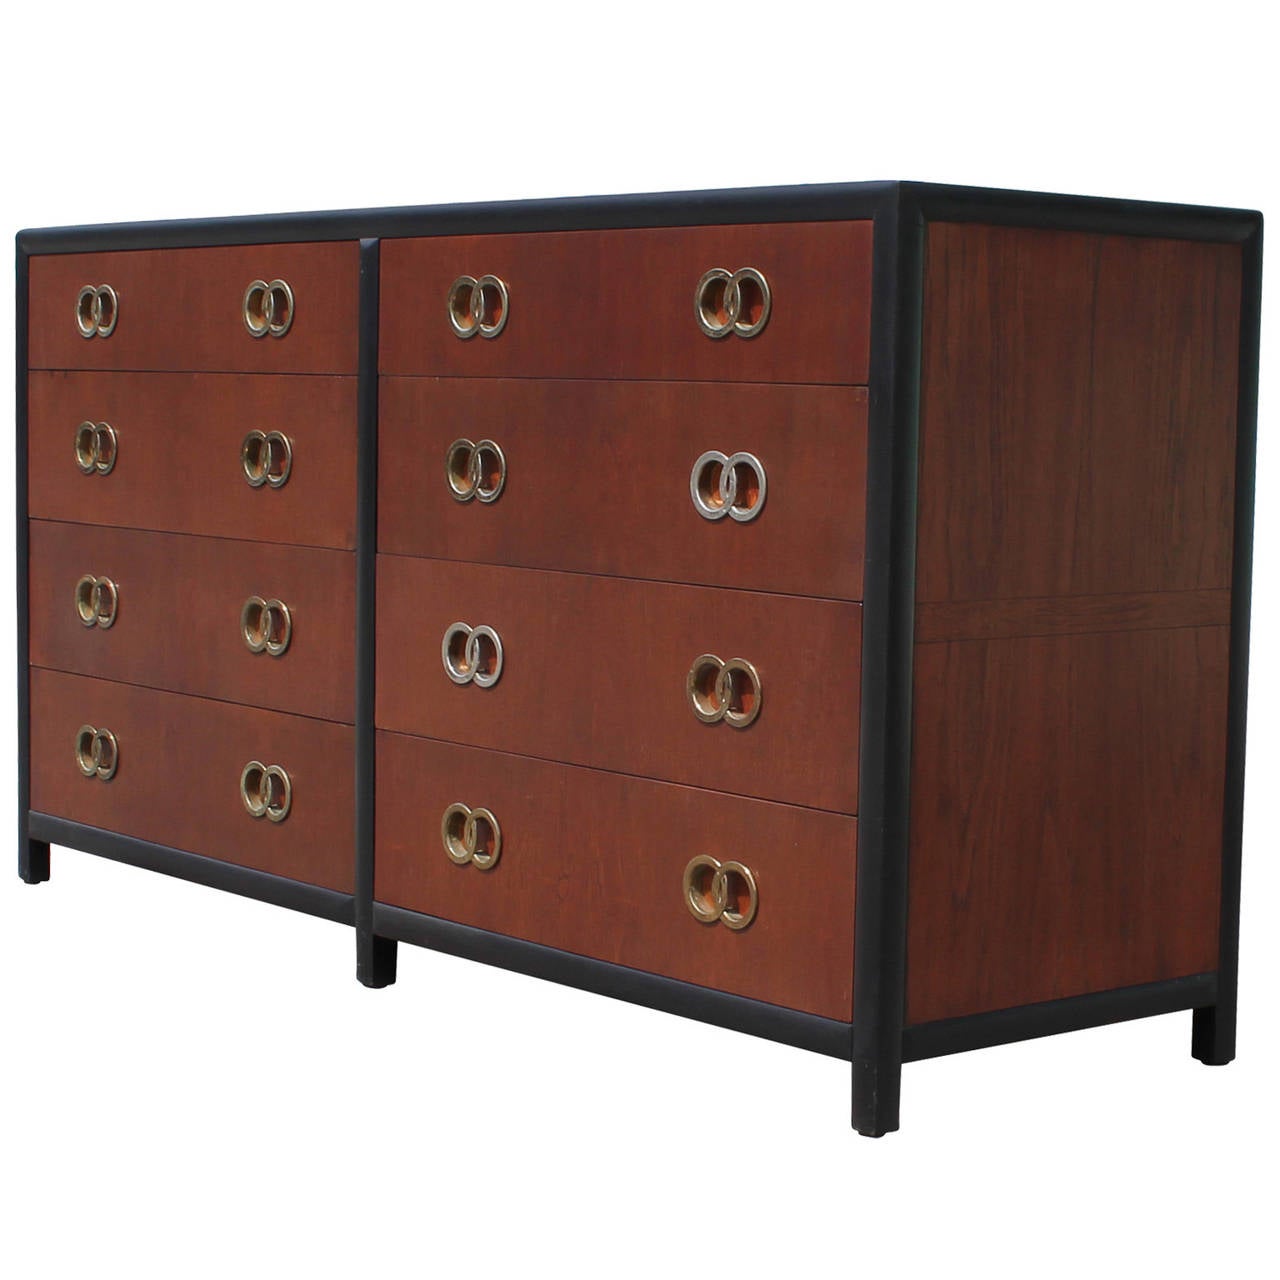 hardware for dressers